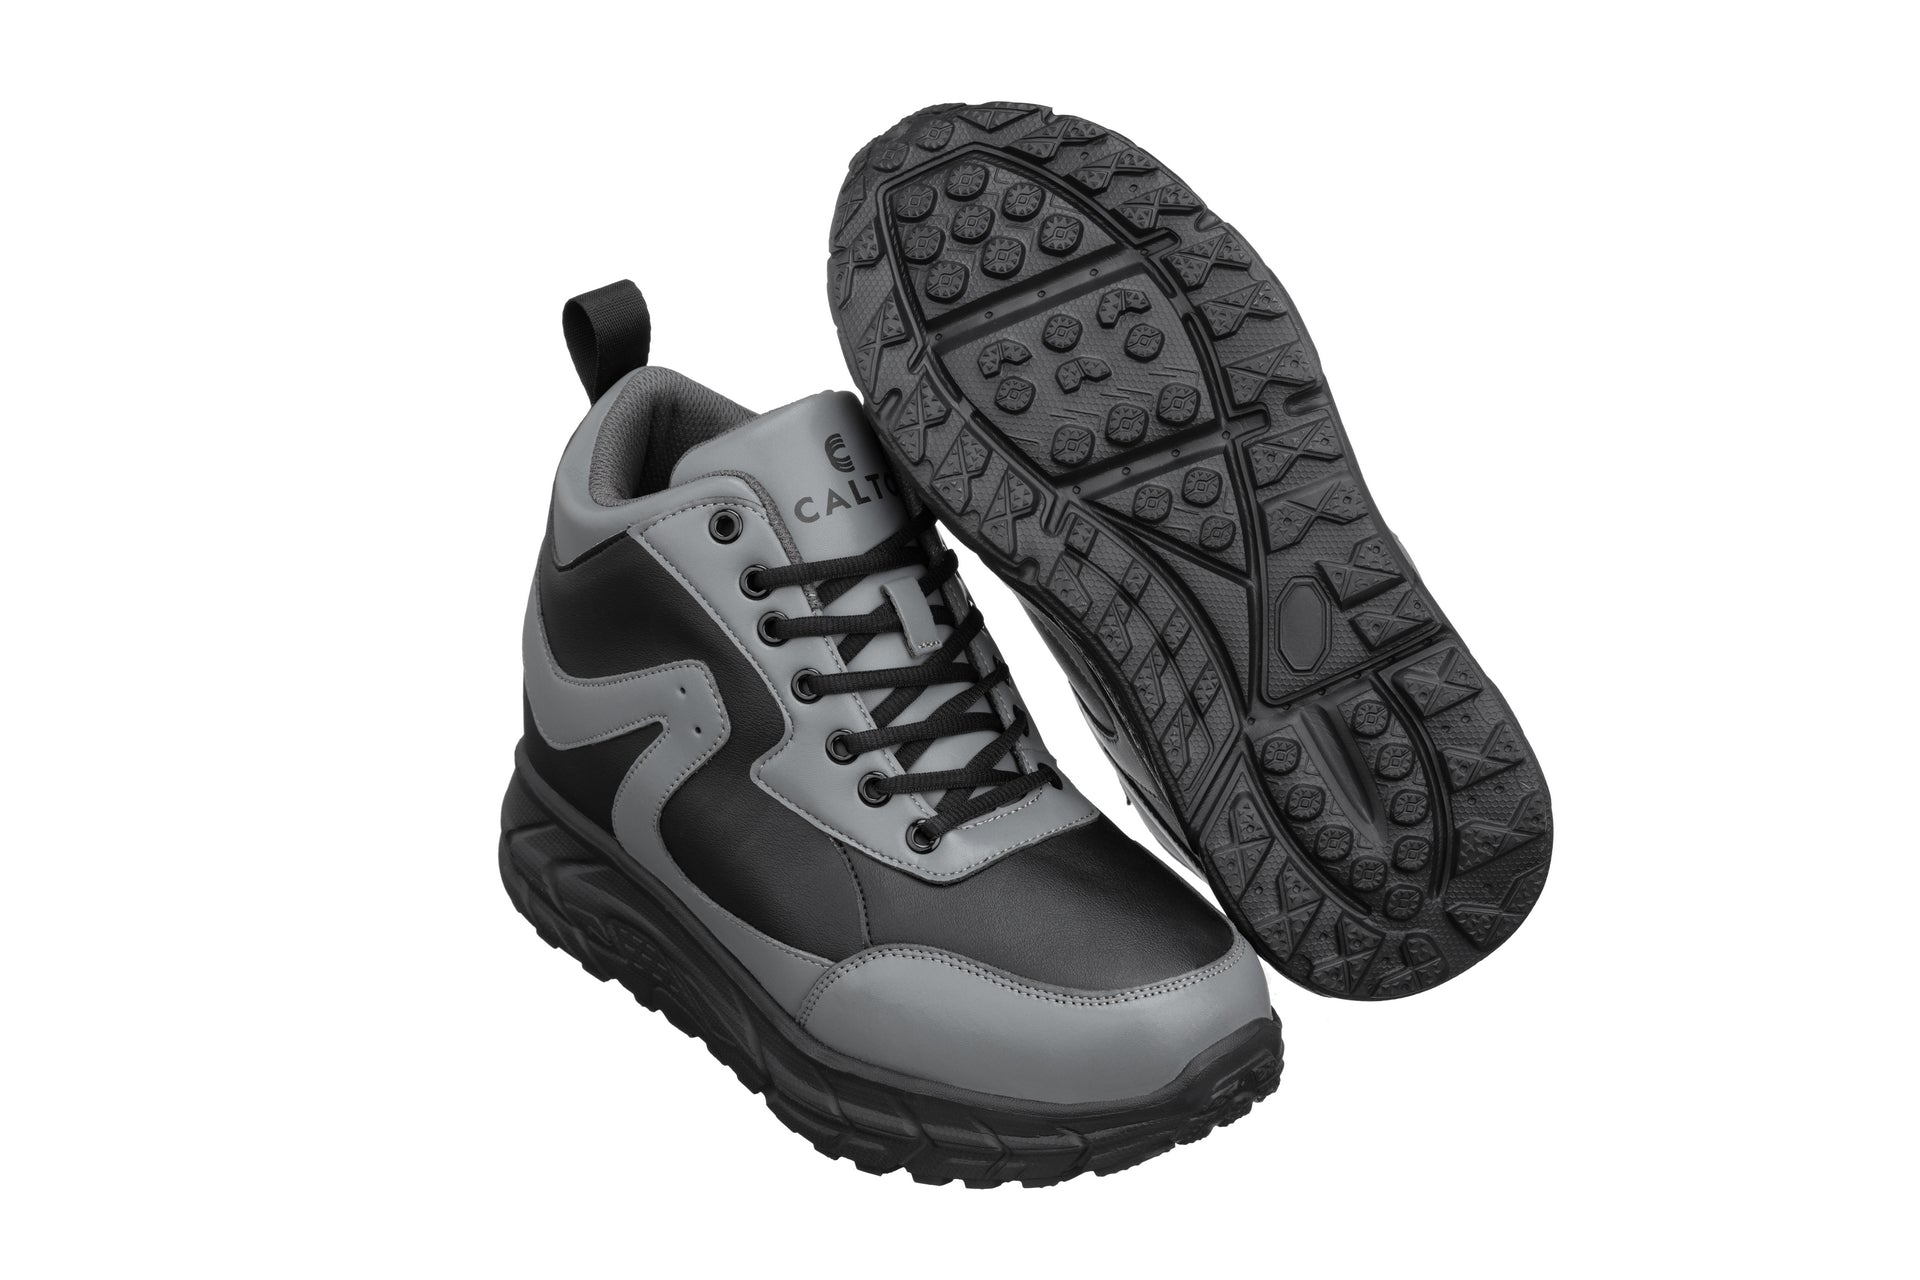 Elevator shoes height increase CALTO - S22771 - 4 Inches Taller (Black/Grey) - Hiking Style Boots